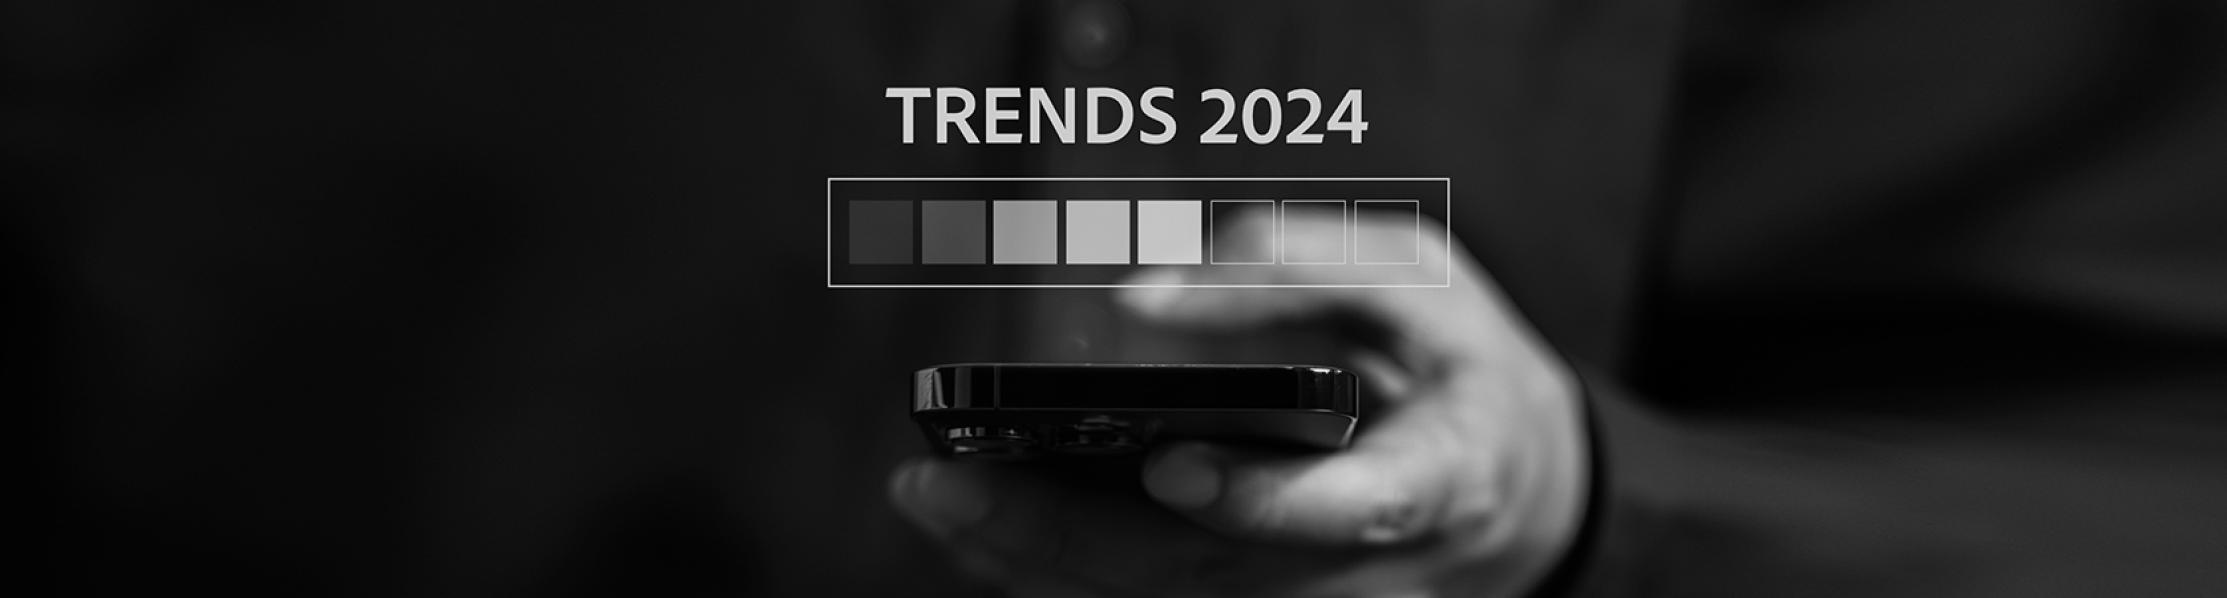 Graphic showing a hand holding a mobile phone with text displaying trends for 2024